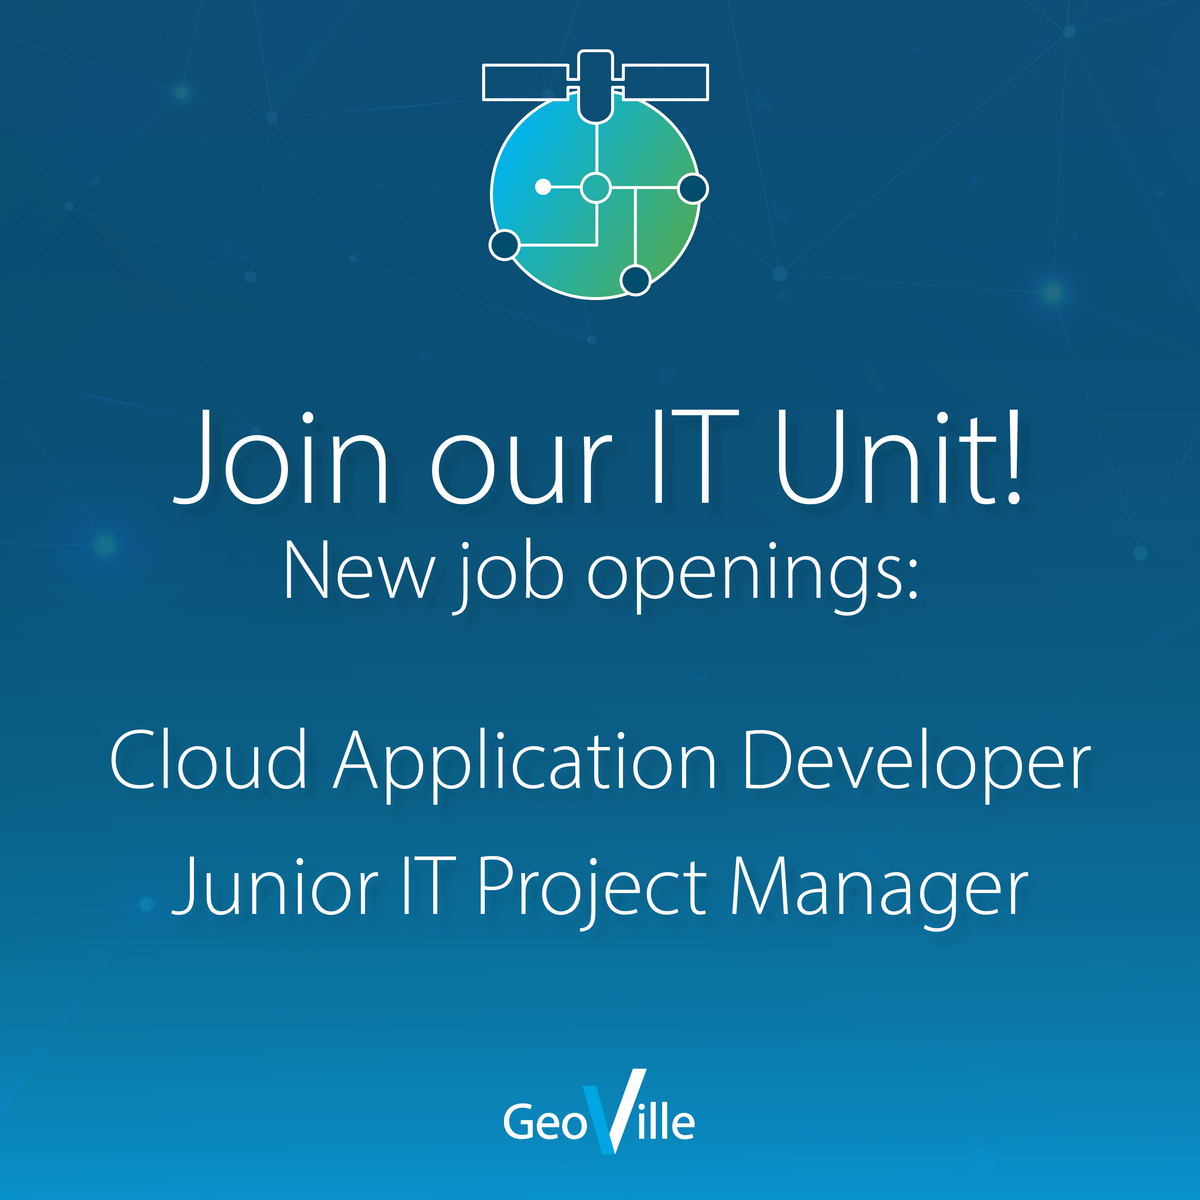 Join our team as a Cloud Application Developer or Junior IT Project Manager